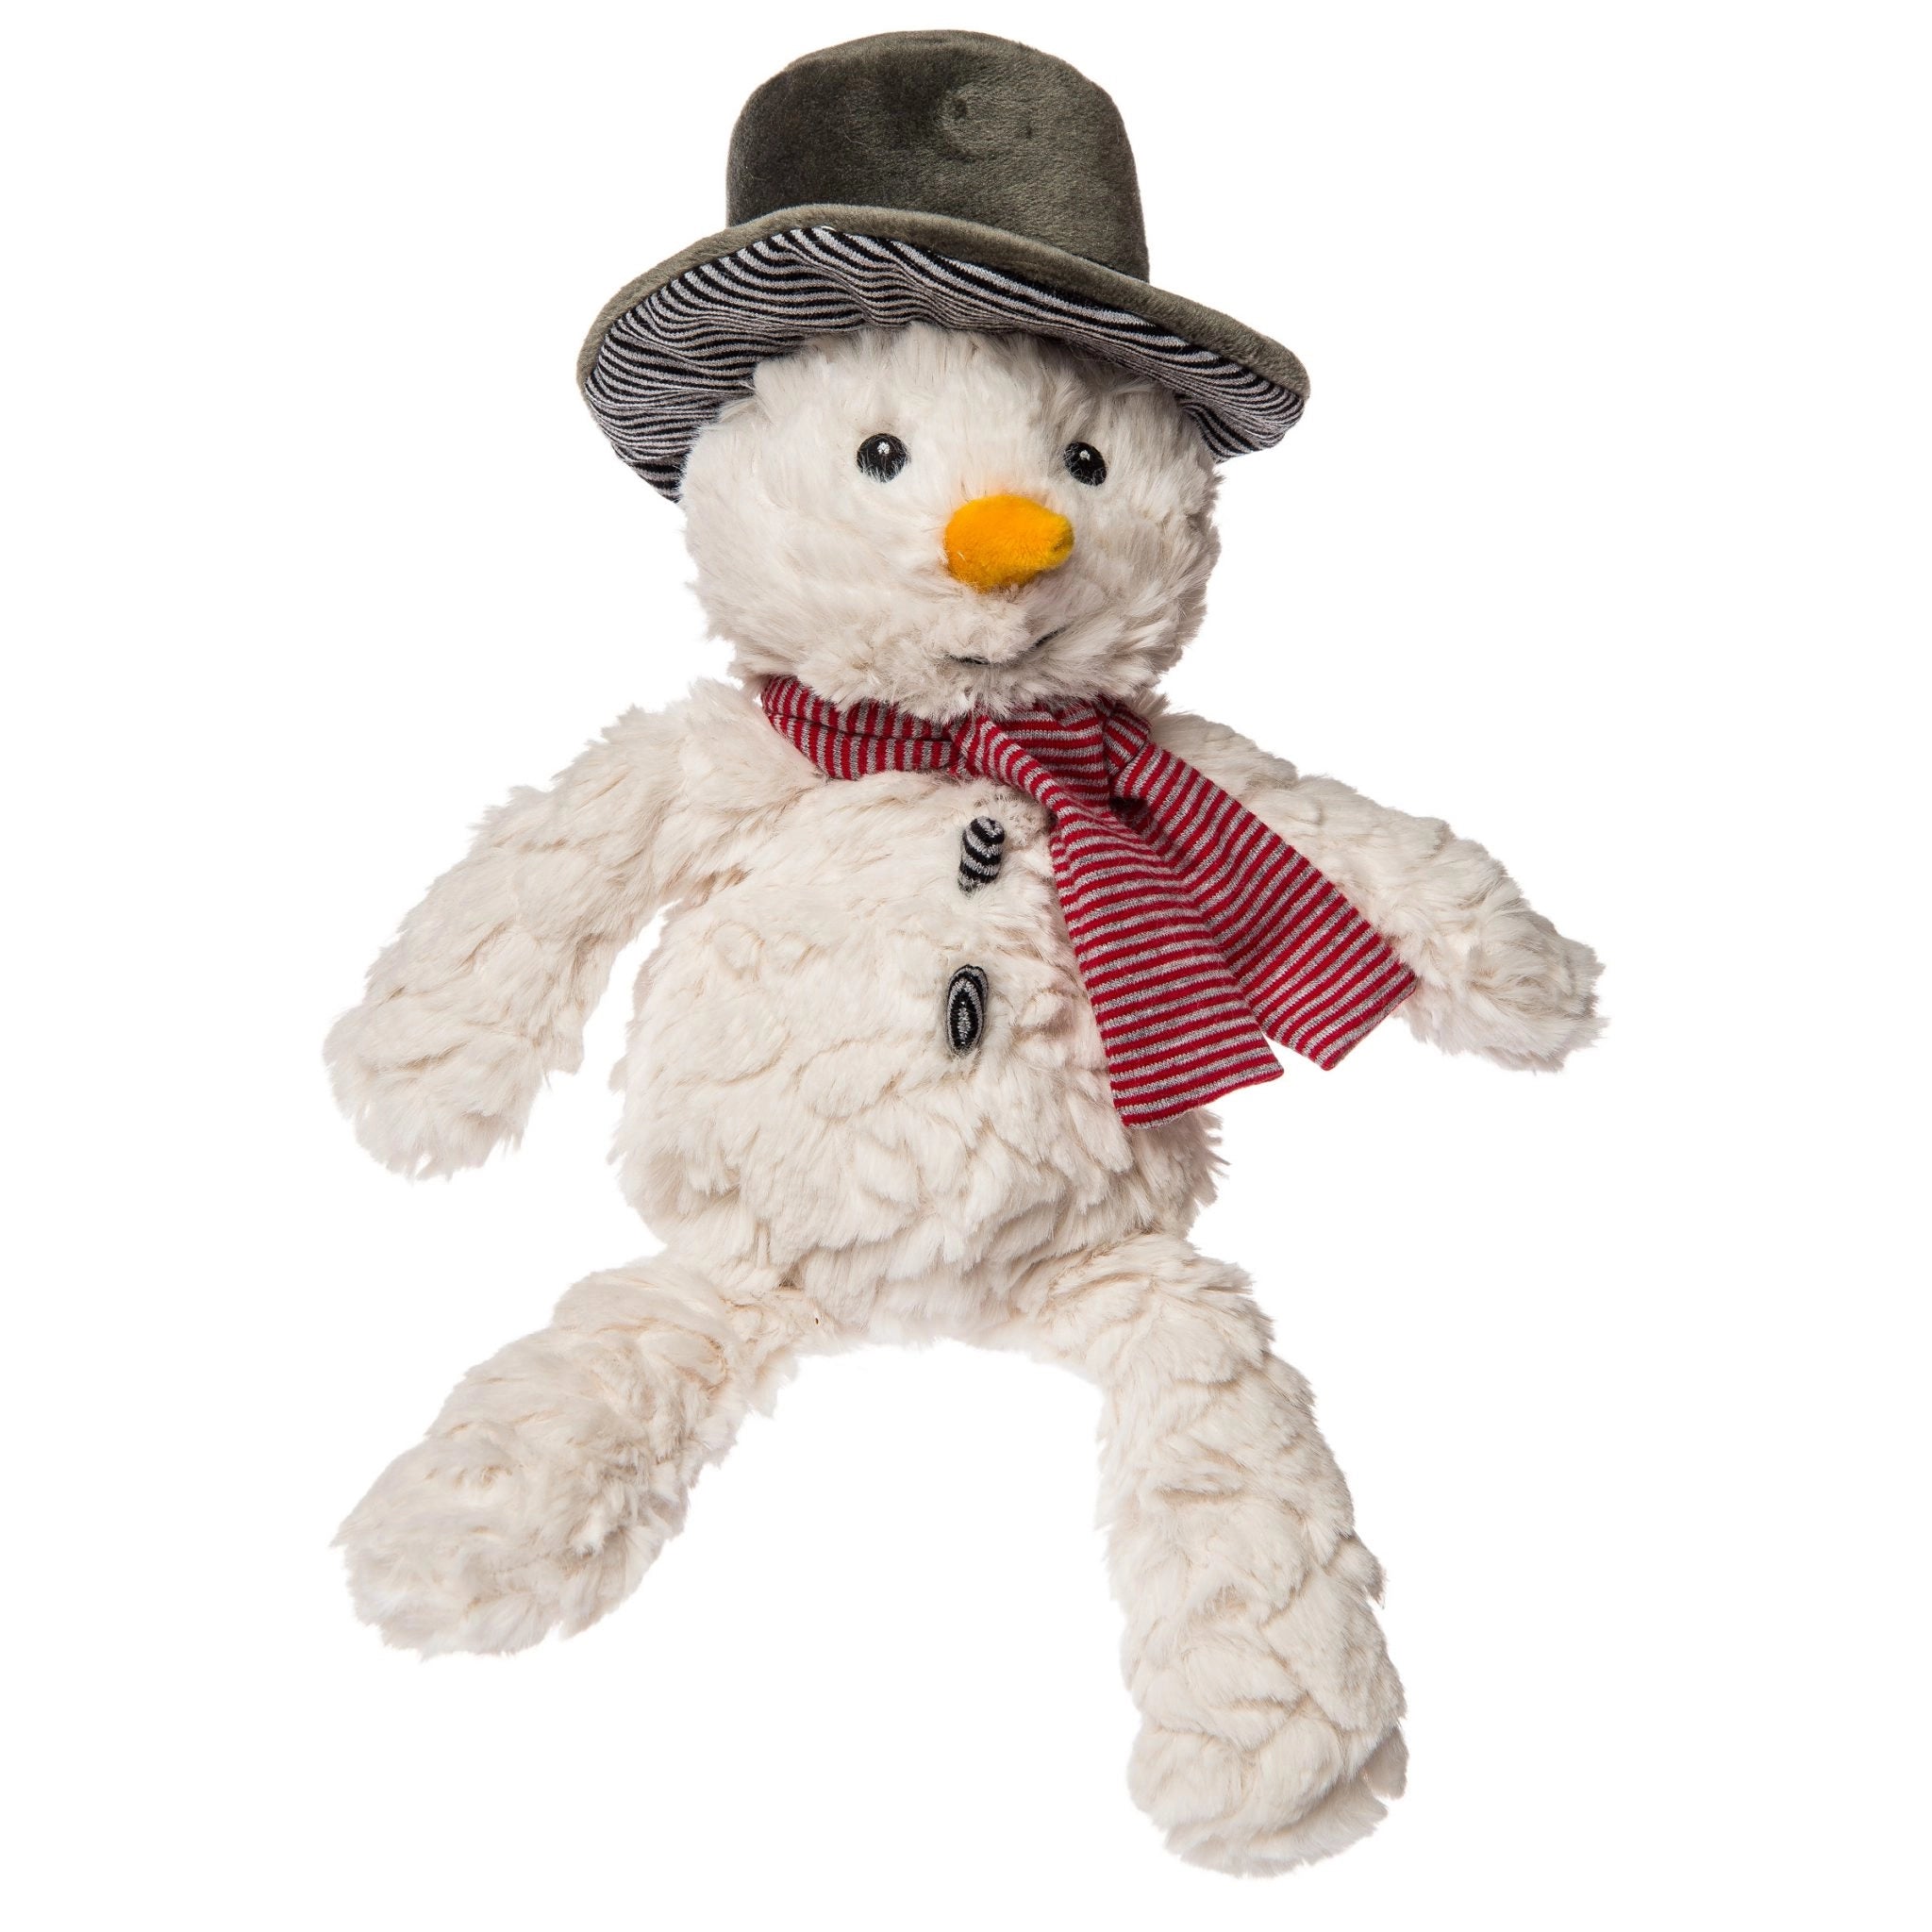 Mary Meyer Putty Nursery Soft Stuffed Toy, Blizzard Snowman - ANB Baby -Less than $20